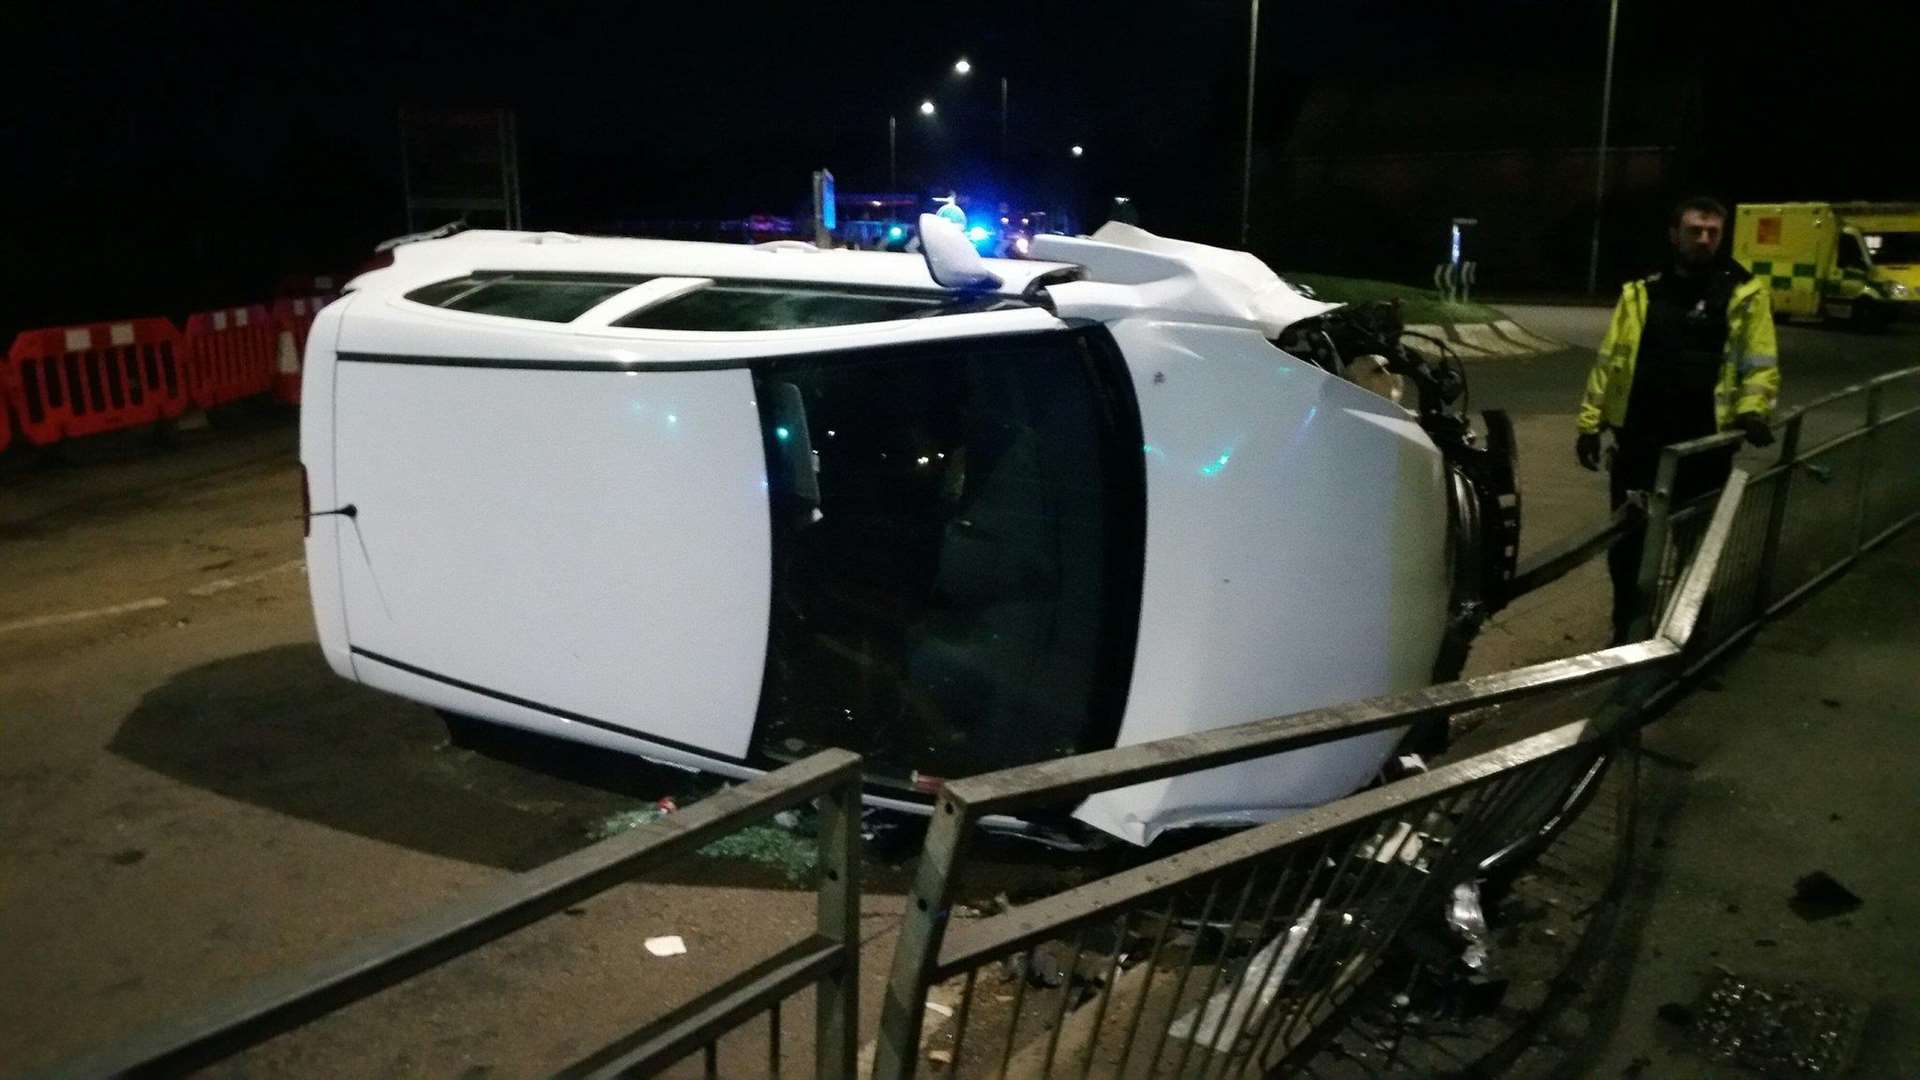 The passengers of this car "amazingly" suffered no serious injuries. Picture: @kentpolicecbury